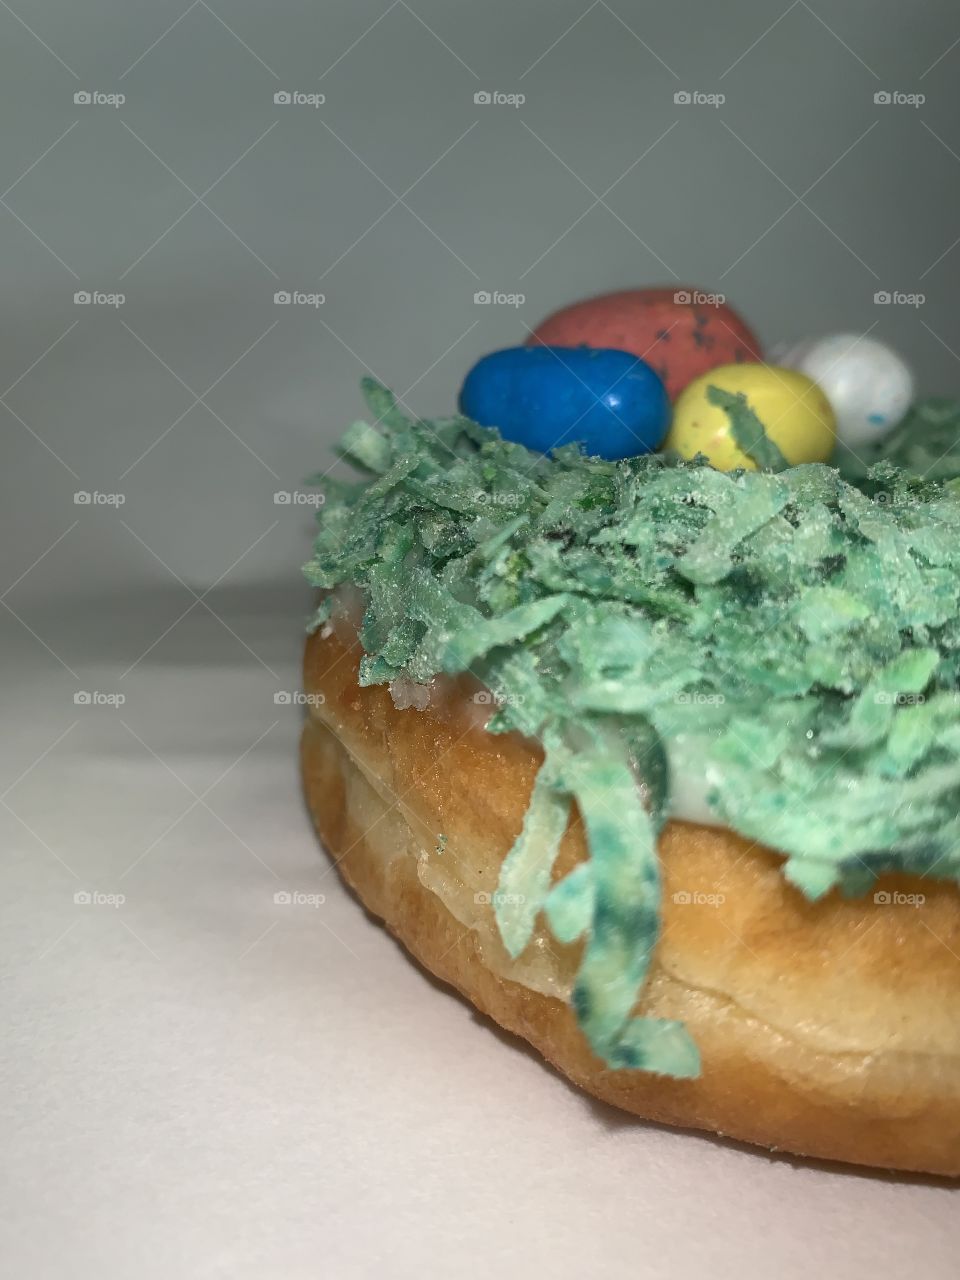 Big, delicious and captivating to the eye. A picture taken of an Easter themed donut with just enough coconut!